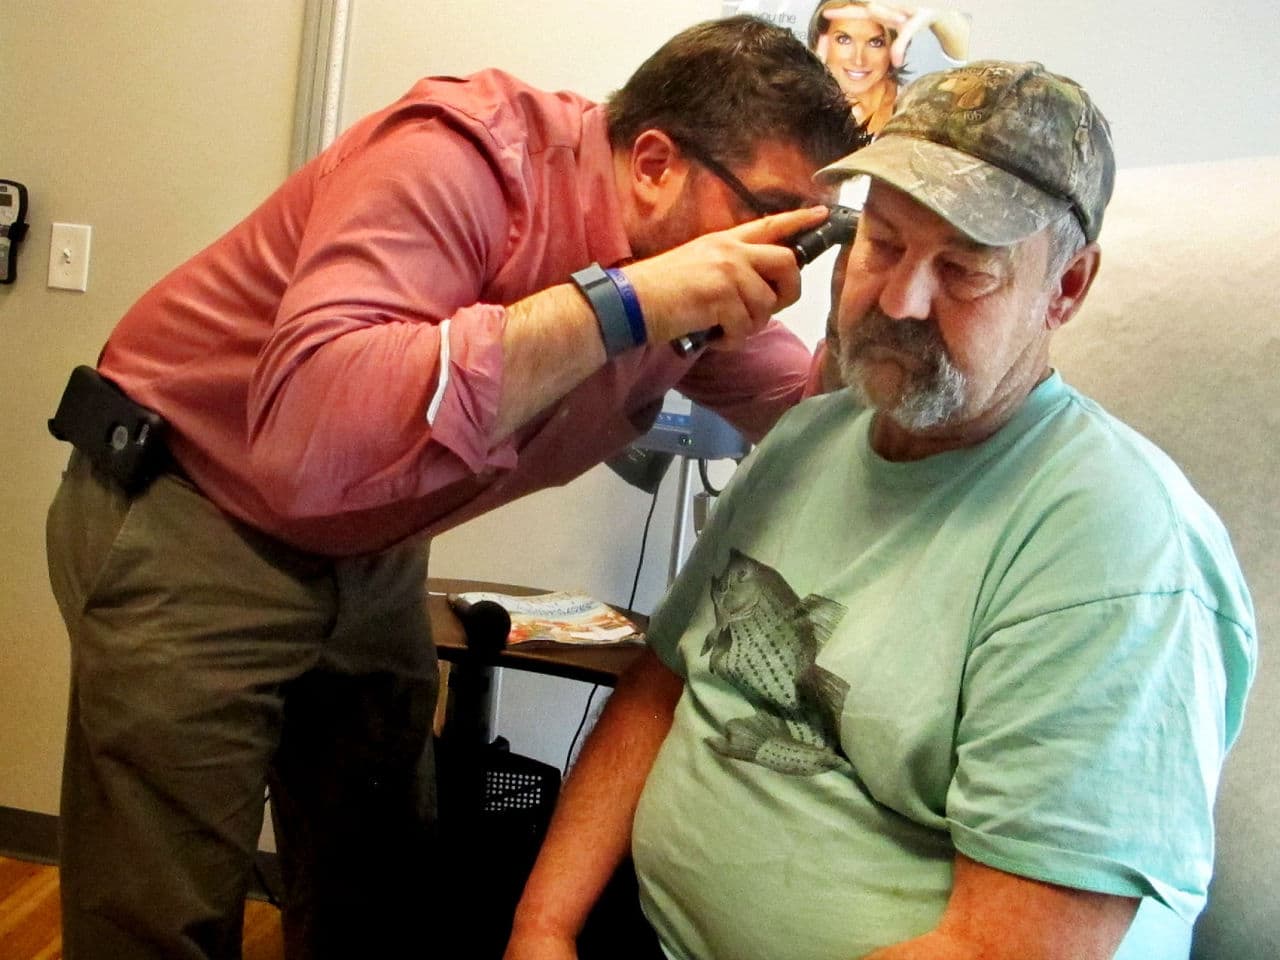 Dr. Jeff Gold and his patient Steve Bird, who is being examined for an earache (Martha Bebinger/WBUR)